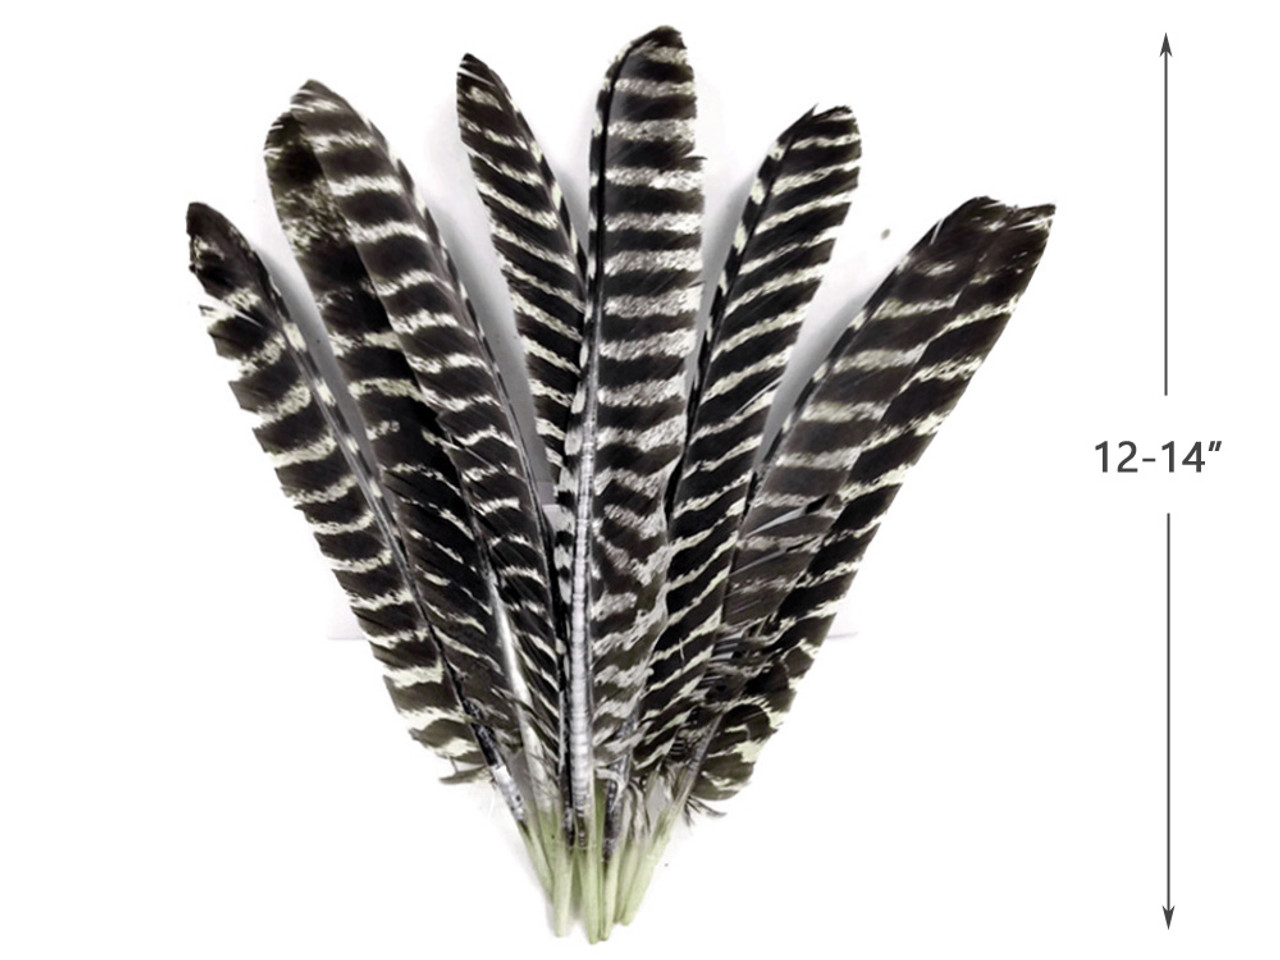 50 Pieces - Natural Barred Wild Merriam Turkey Rounds Wing Quill Wholesale  Feathers (Bulk)